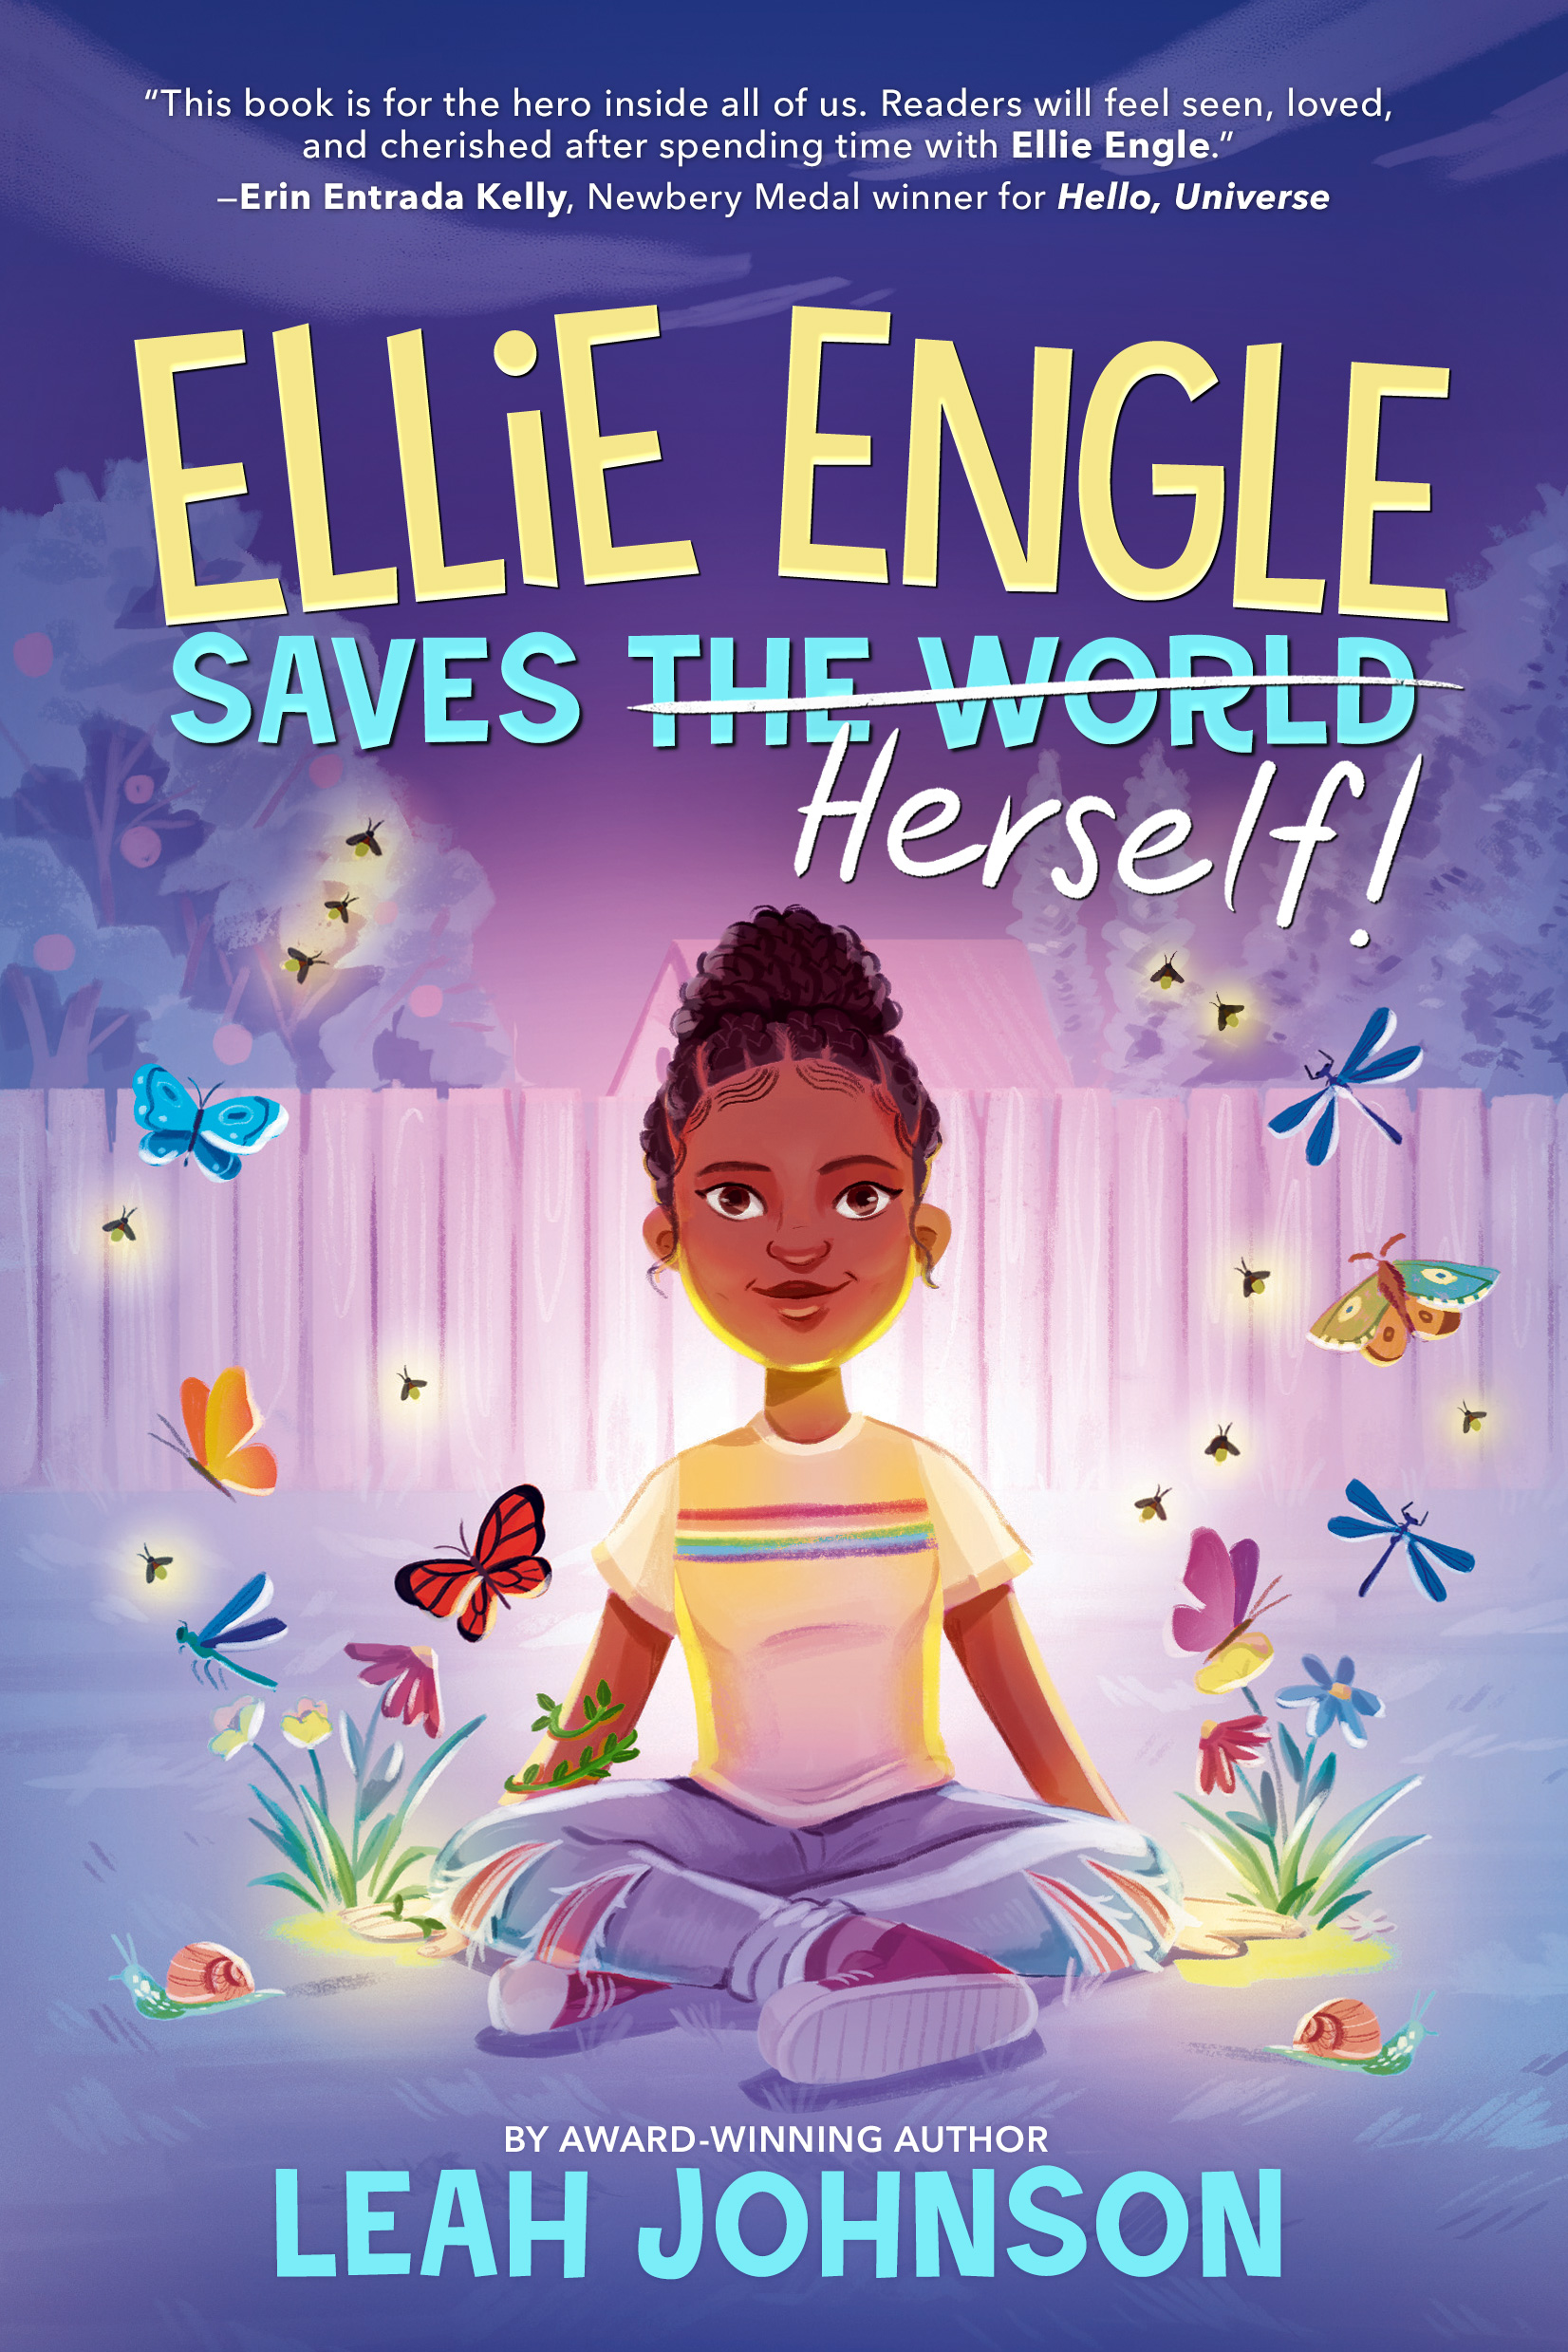 Ellie Engle, a girl, is sitting cross legged in a backyard and is surrounded by glowing insects and butterflies. Above her head spells out the title of the book with the words “the world” crossed off and replaced by a handwritten font that spells out “herself” instead. 